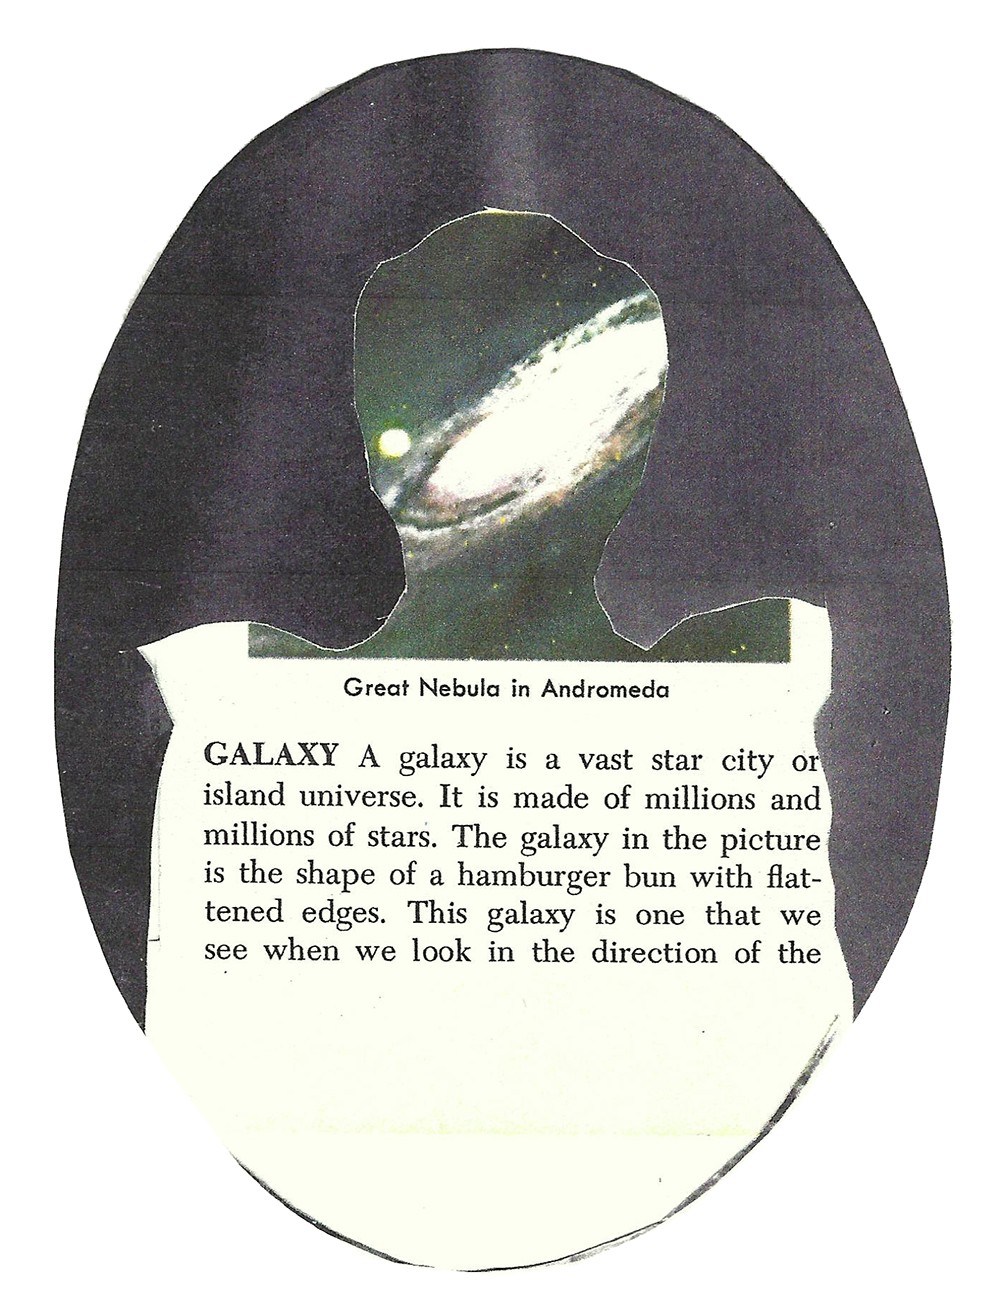 Collage of a cut-out silhouette and text explaining the term "galaxy."